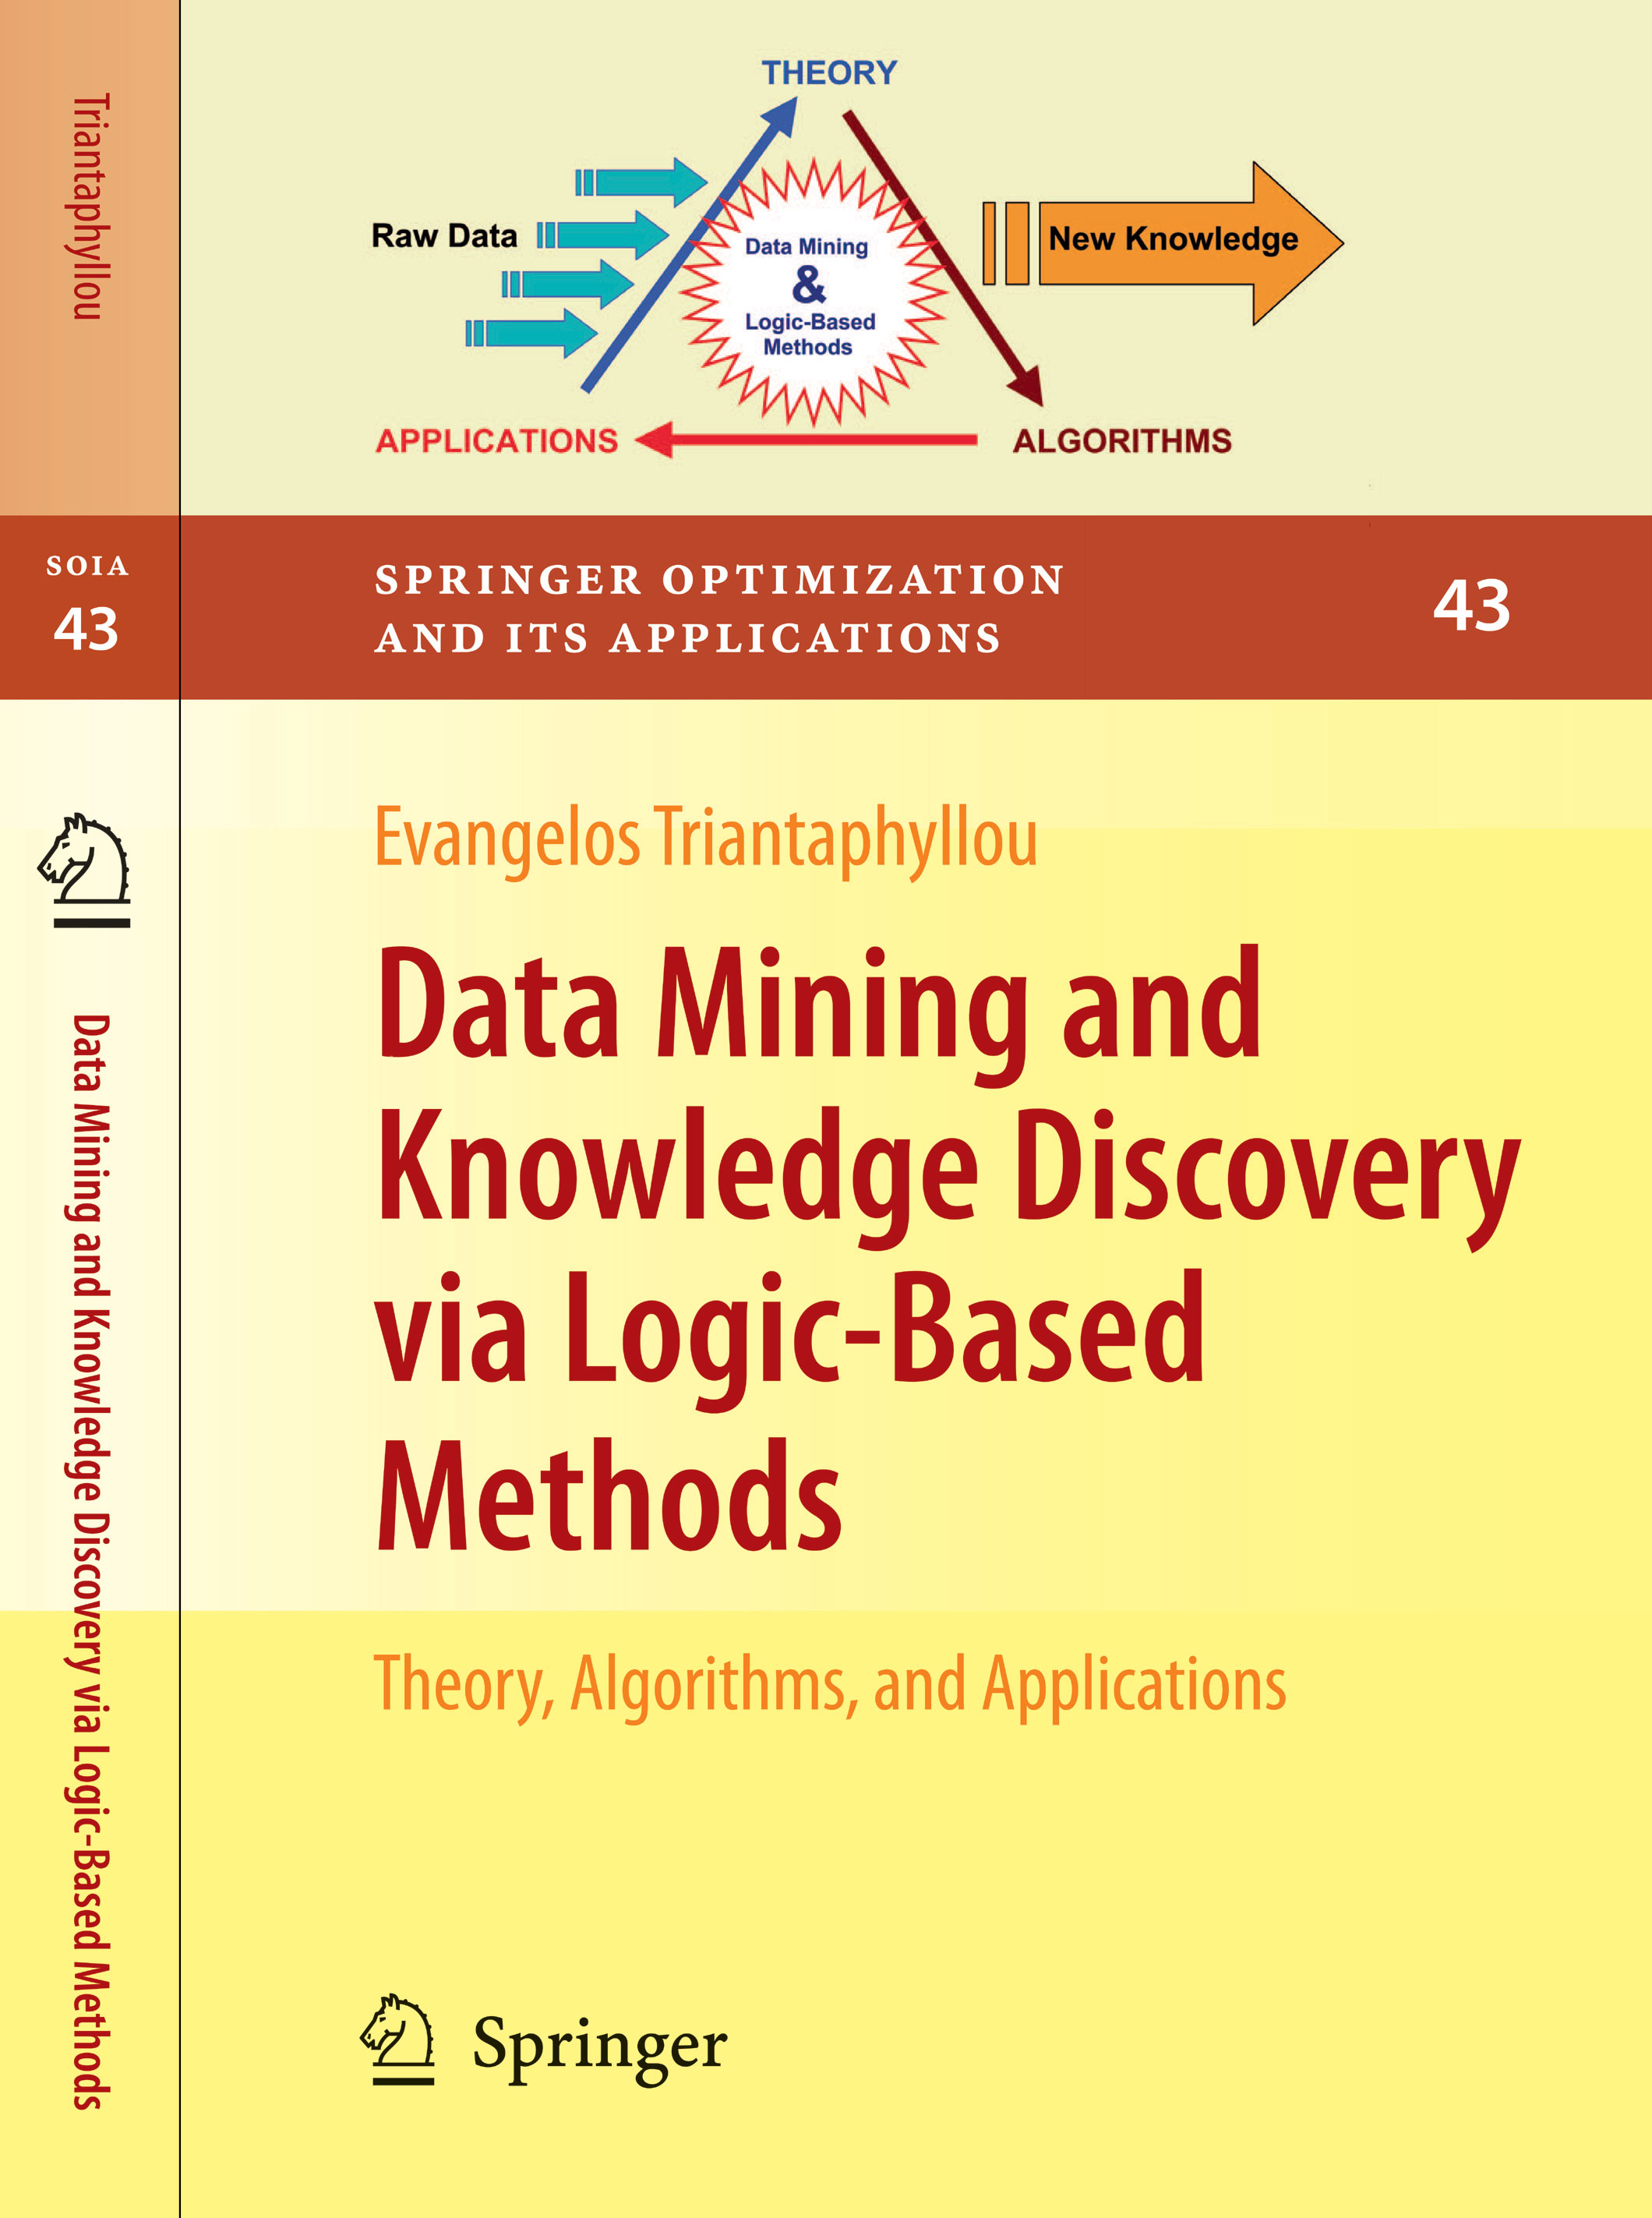 A Unique Book on Data Mining and Mathematical Logic!